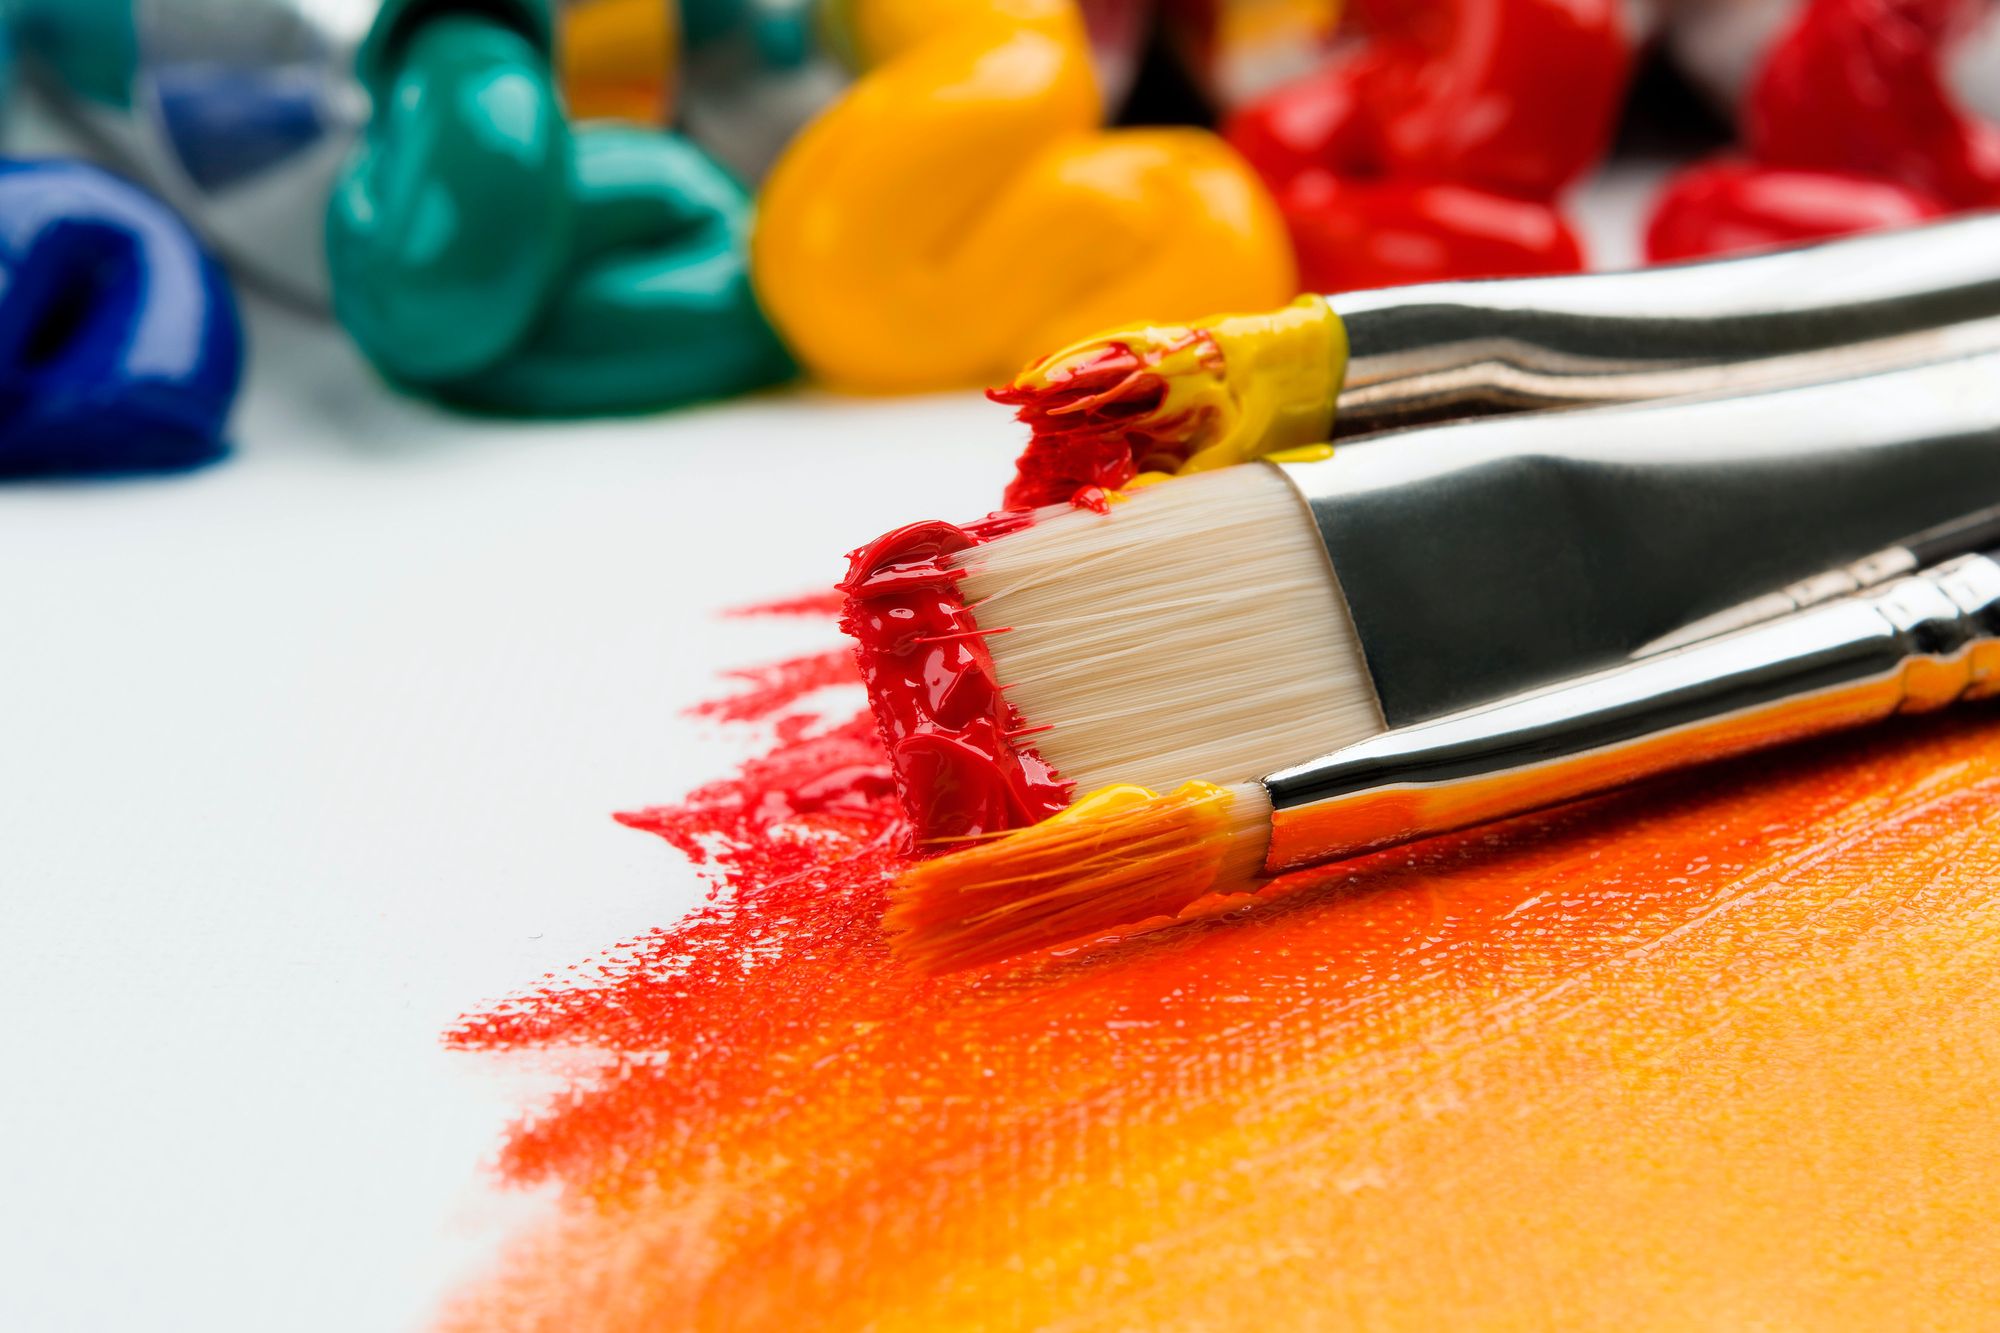 Types of paint brushes for acrylic - an easy guide